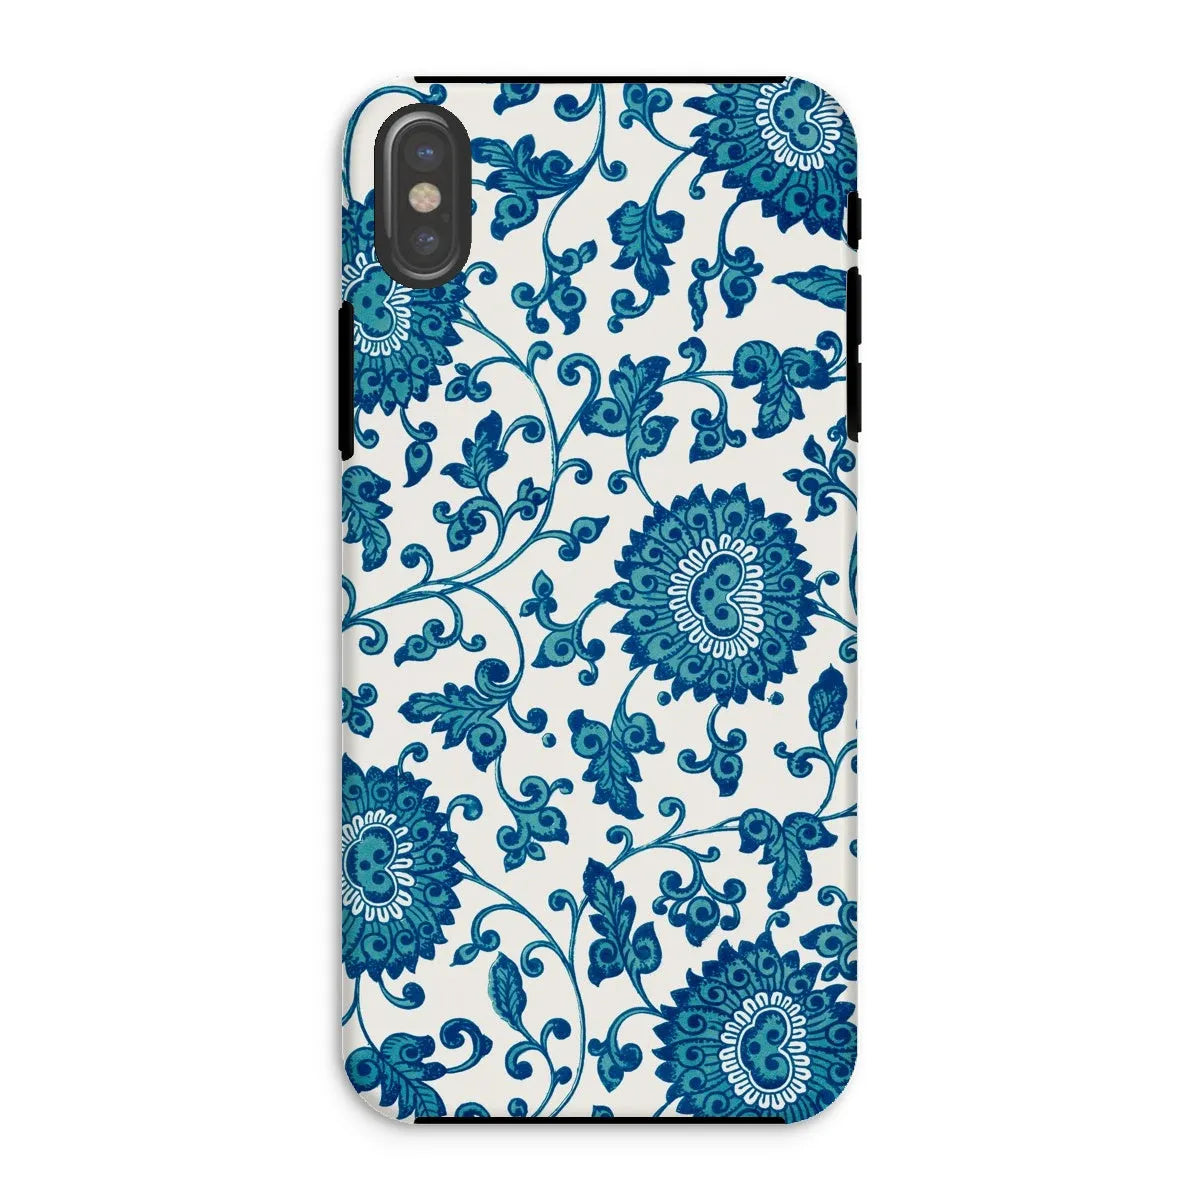 Blue And White Floral Aesthetic Art Phone Case - Owen Jones - Iphone Xs / Matte - Mobile Phone Cases - Aesthetic Art